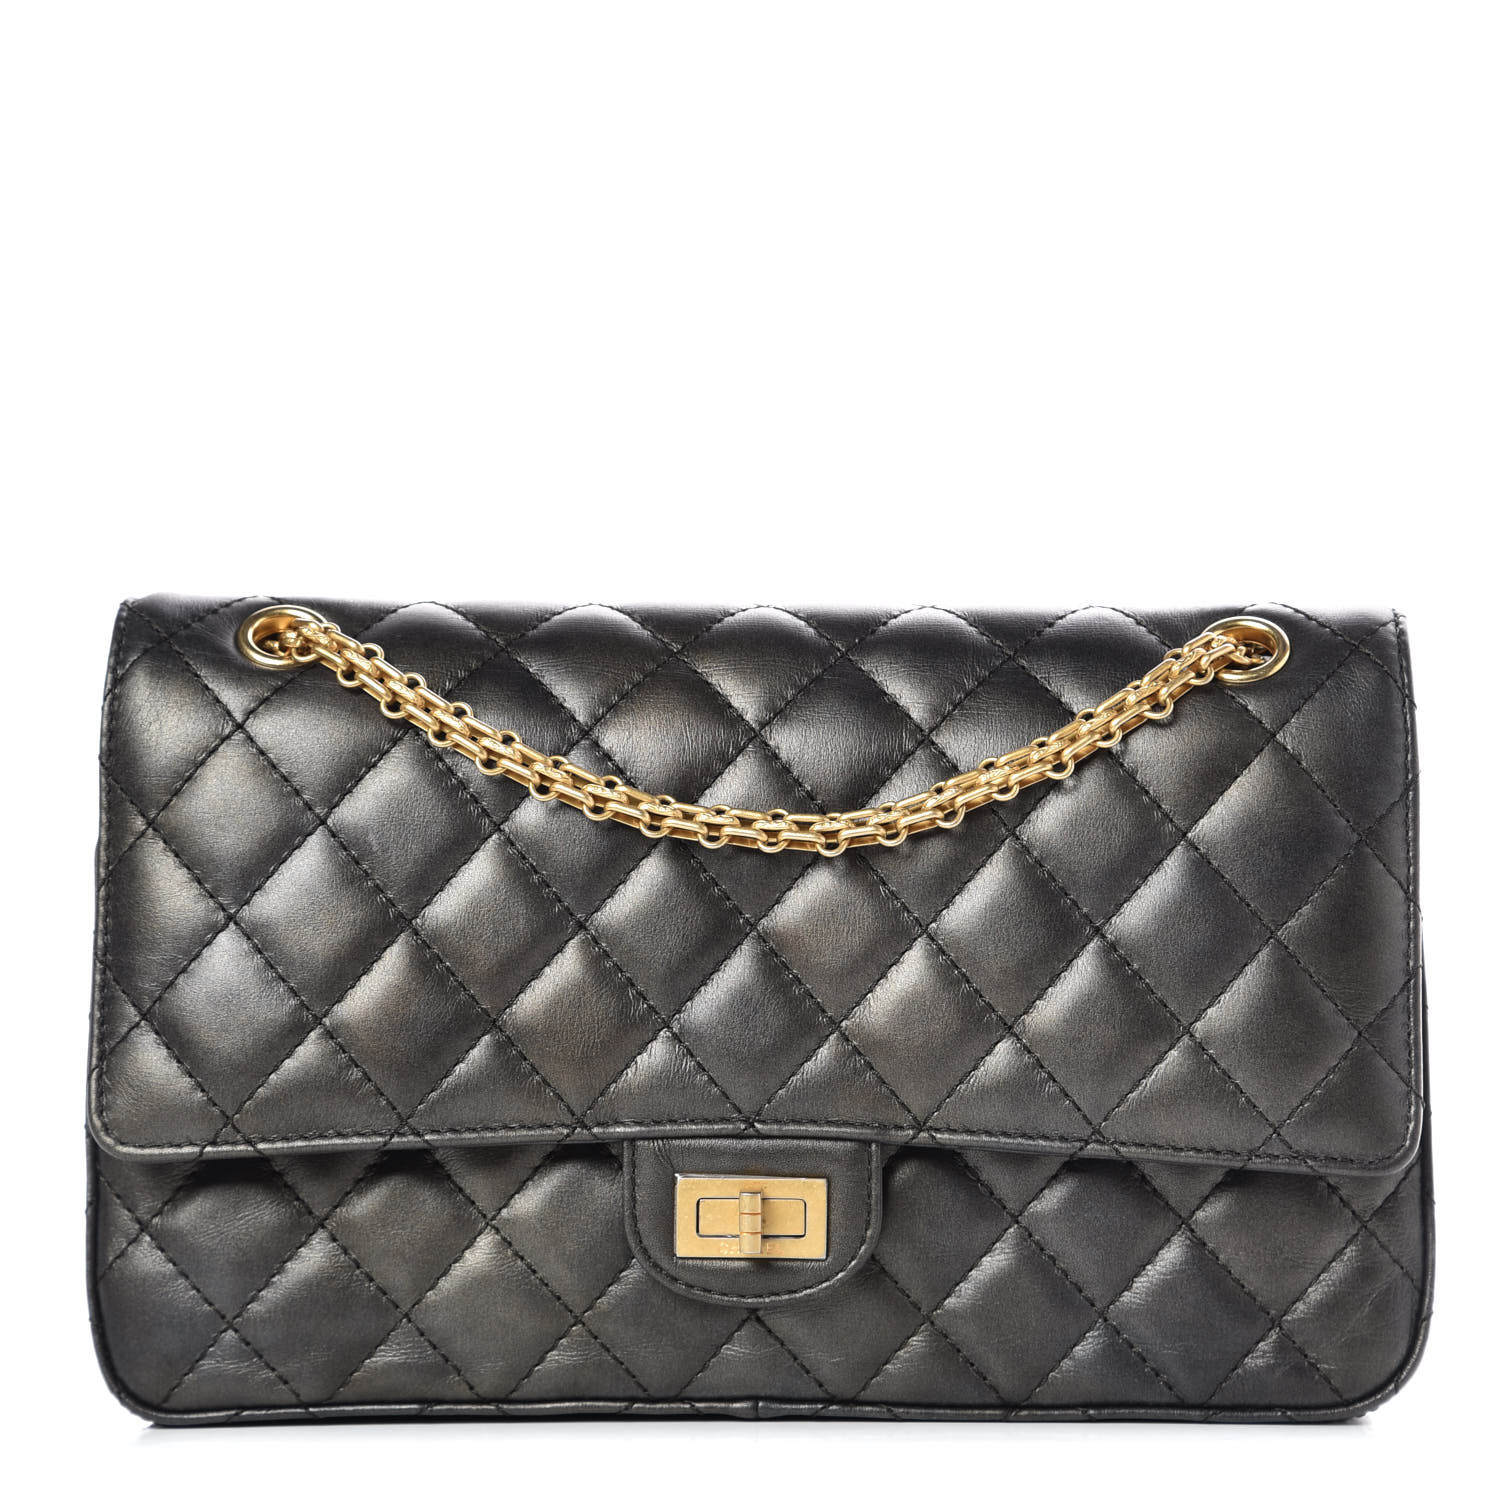 CHANEL Metallic Calfskin Quilted 2.55 Reissue 226 Flap Charcoal 360228